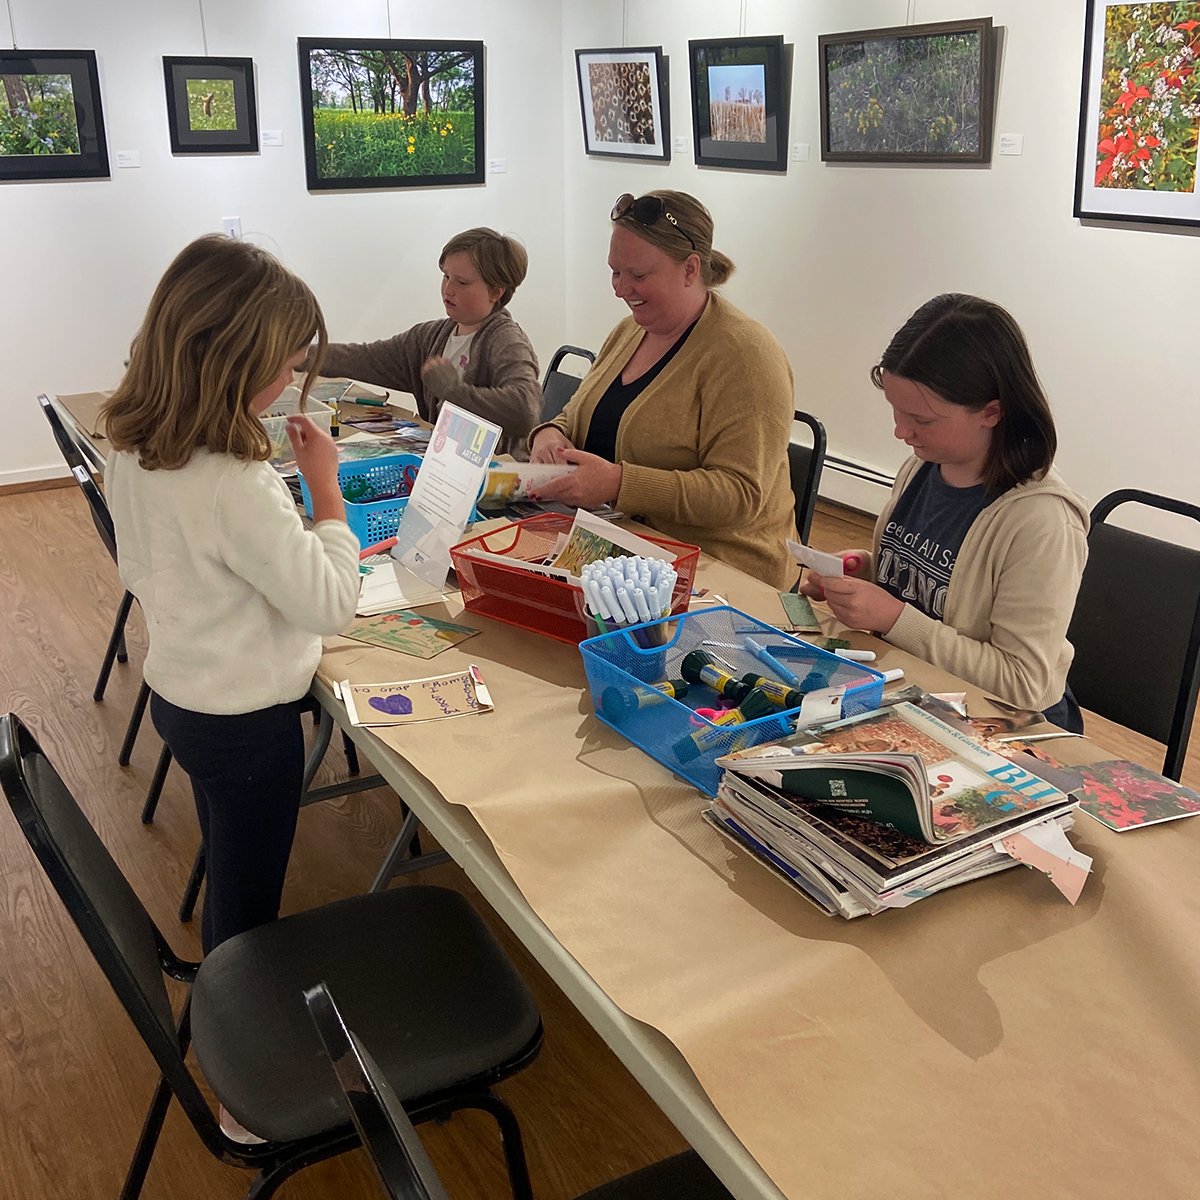 Thank you to those who attended Family Art Day this past weekend! Projects were inspired by our current exhibitions showcasing the work of late printmaker Stephen Rengstorf and photographer Susan Kirt. We had beautiful weather and loved having famili